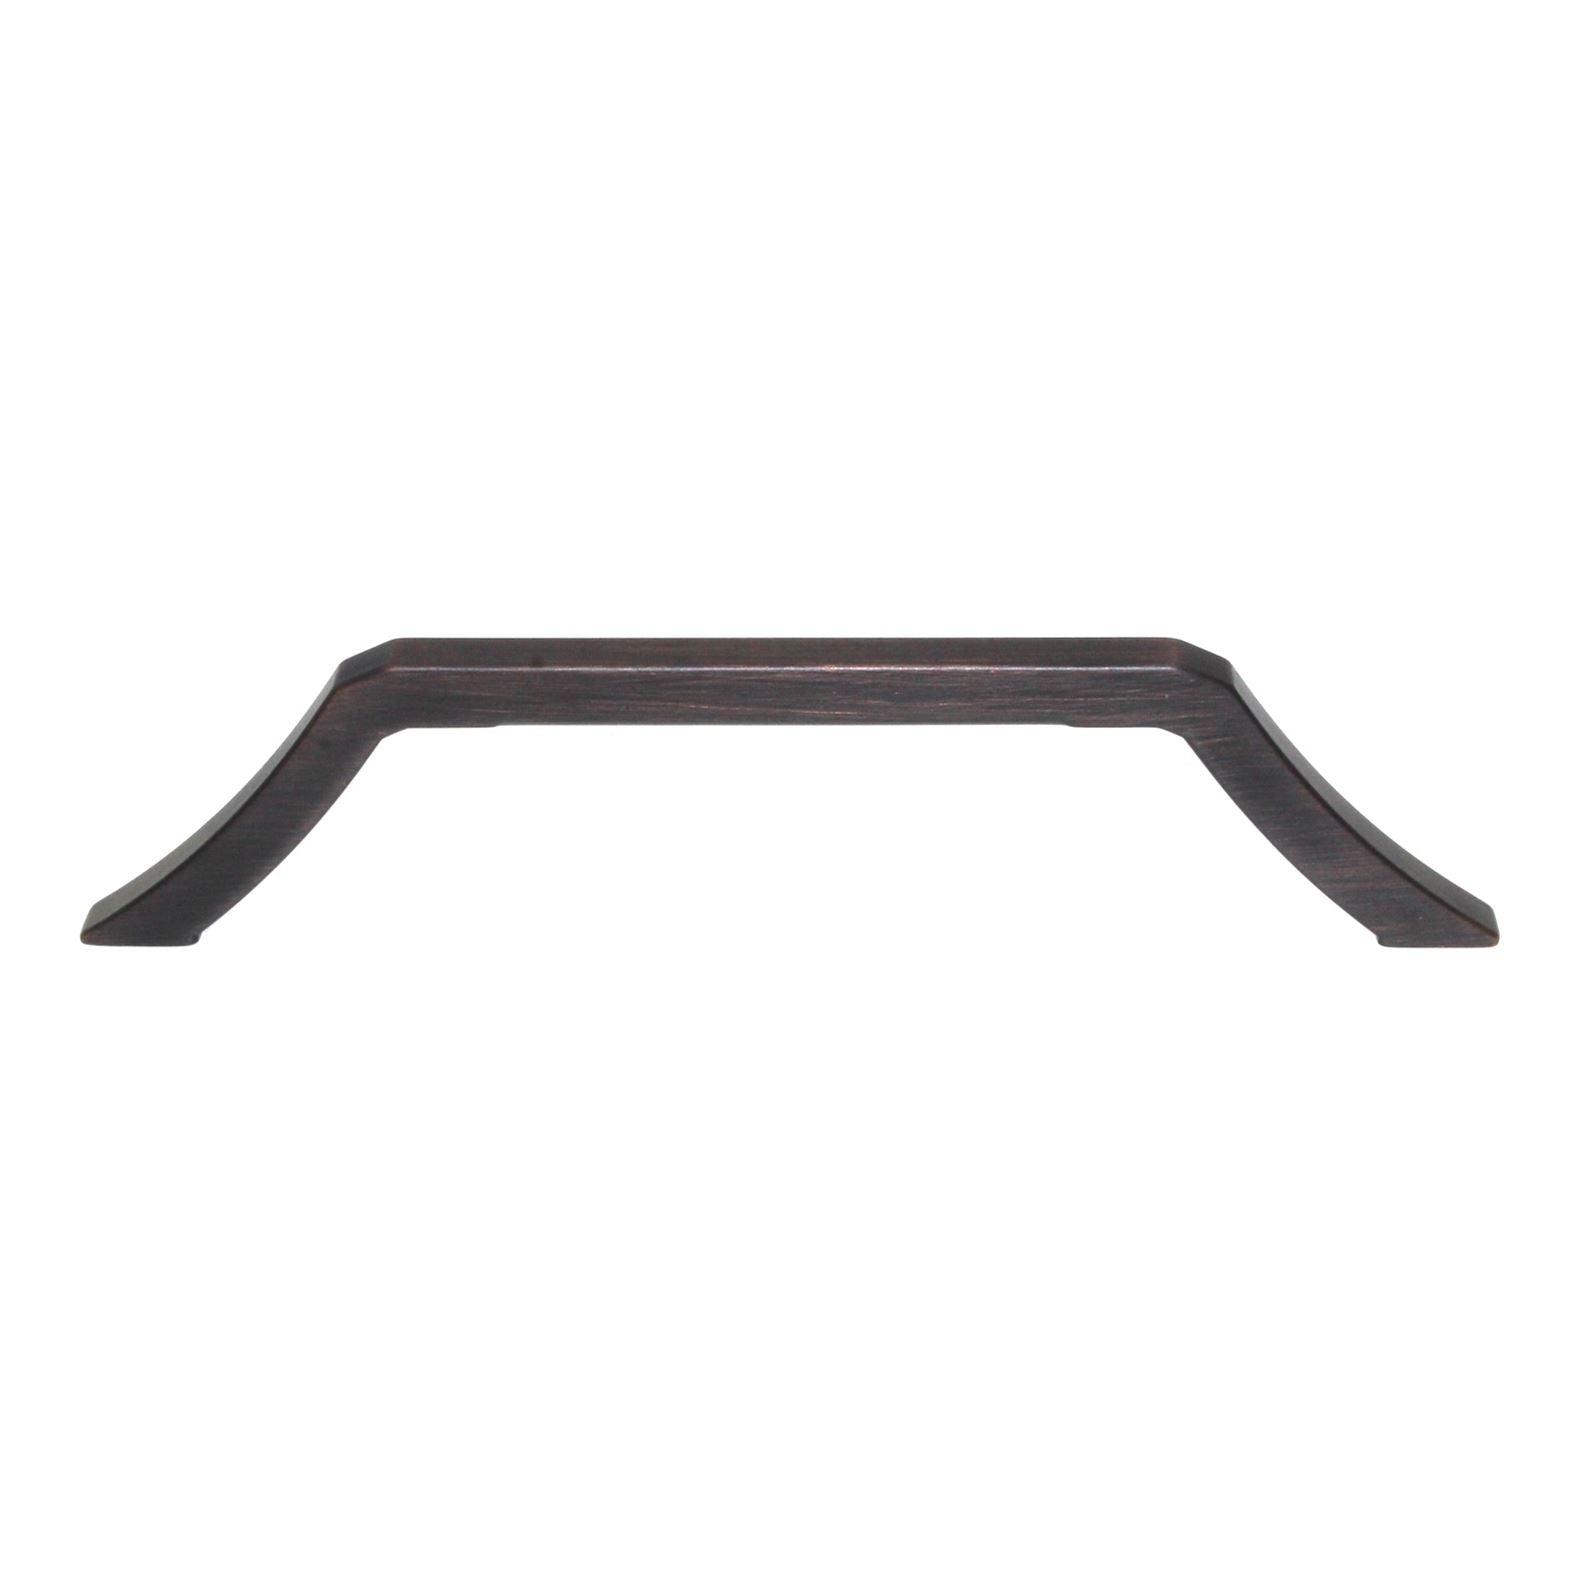 Pride Milan Cabinet Arch Pull 6 1/4" (160mm) Ctr Oil-Rubbed Bronze P94160-10B